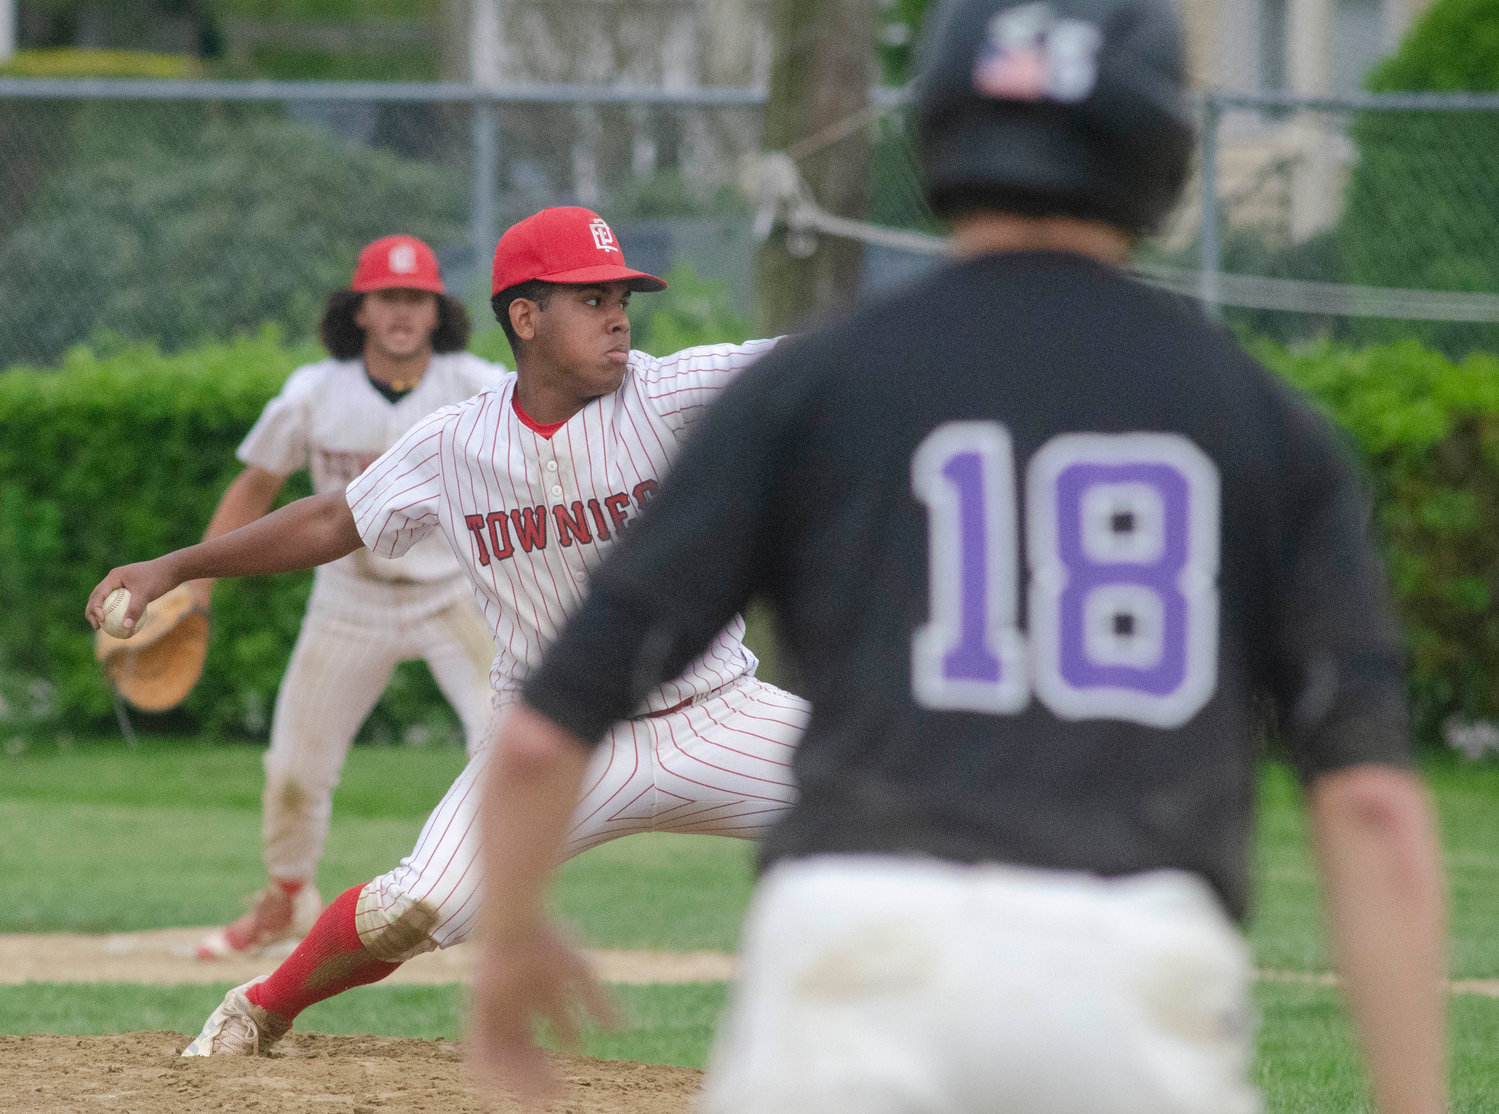 Junior pitcher Ziurel Vargas rears back to pitch with the Townies clinging to a 9-8 lead and Huskies runner Matt Gale on third base in the seventh inning.